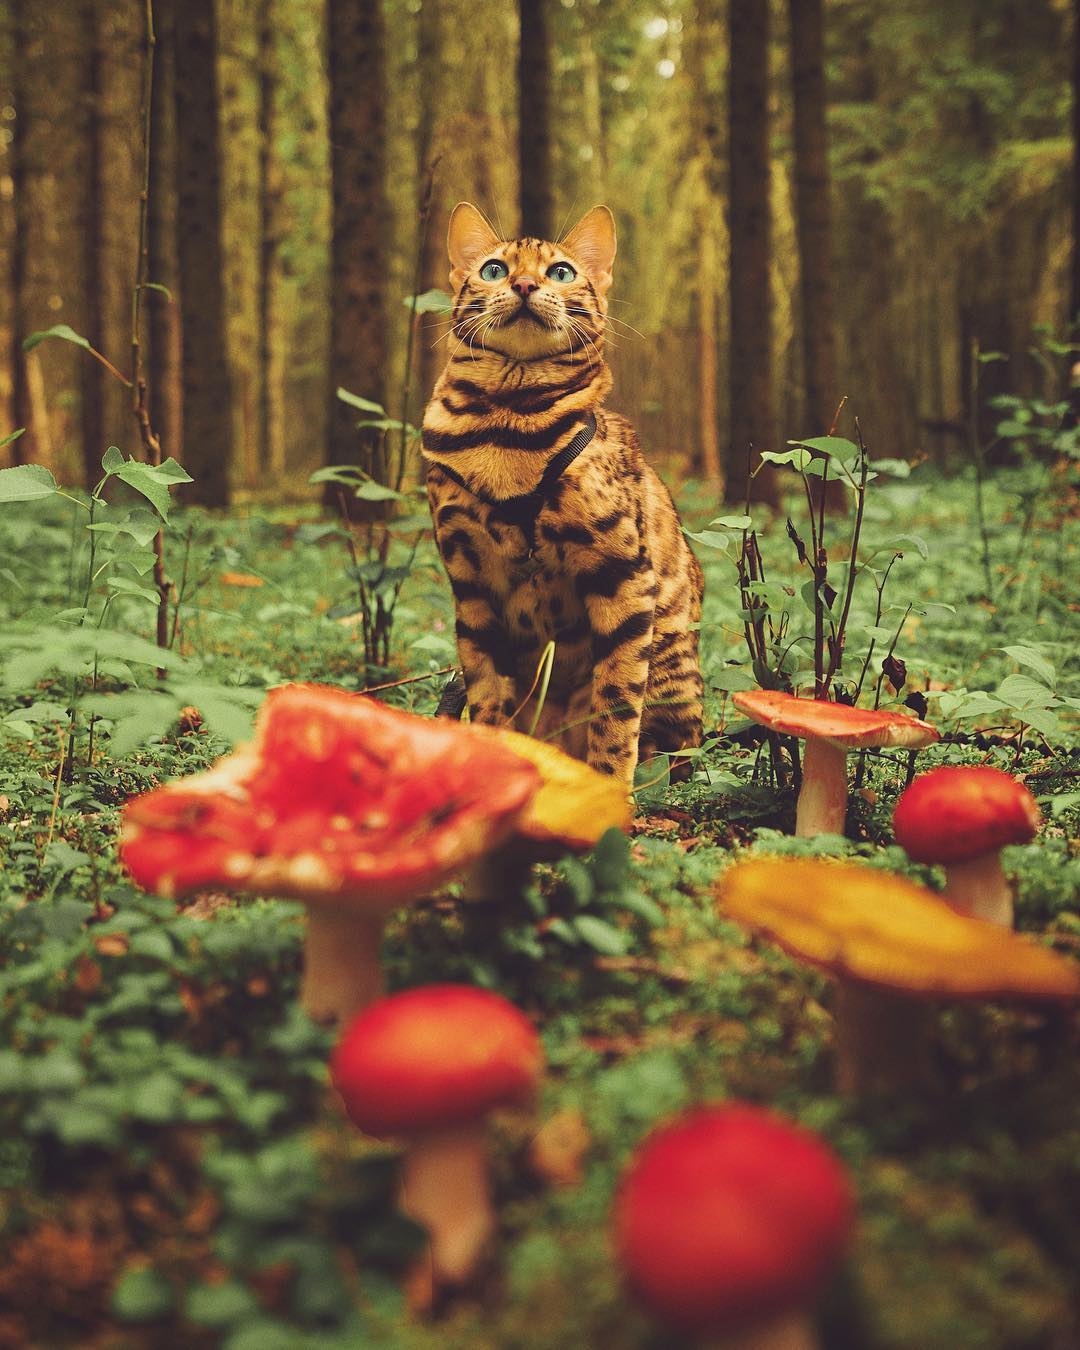 Cat sits among mushrooms in lush forest, looking up at something with an astonished expression.